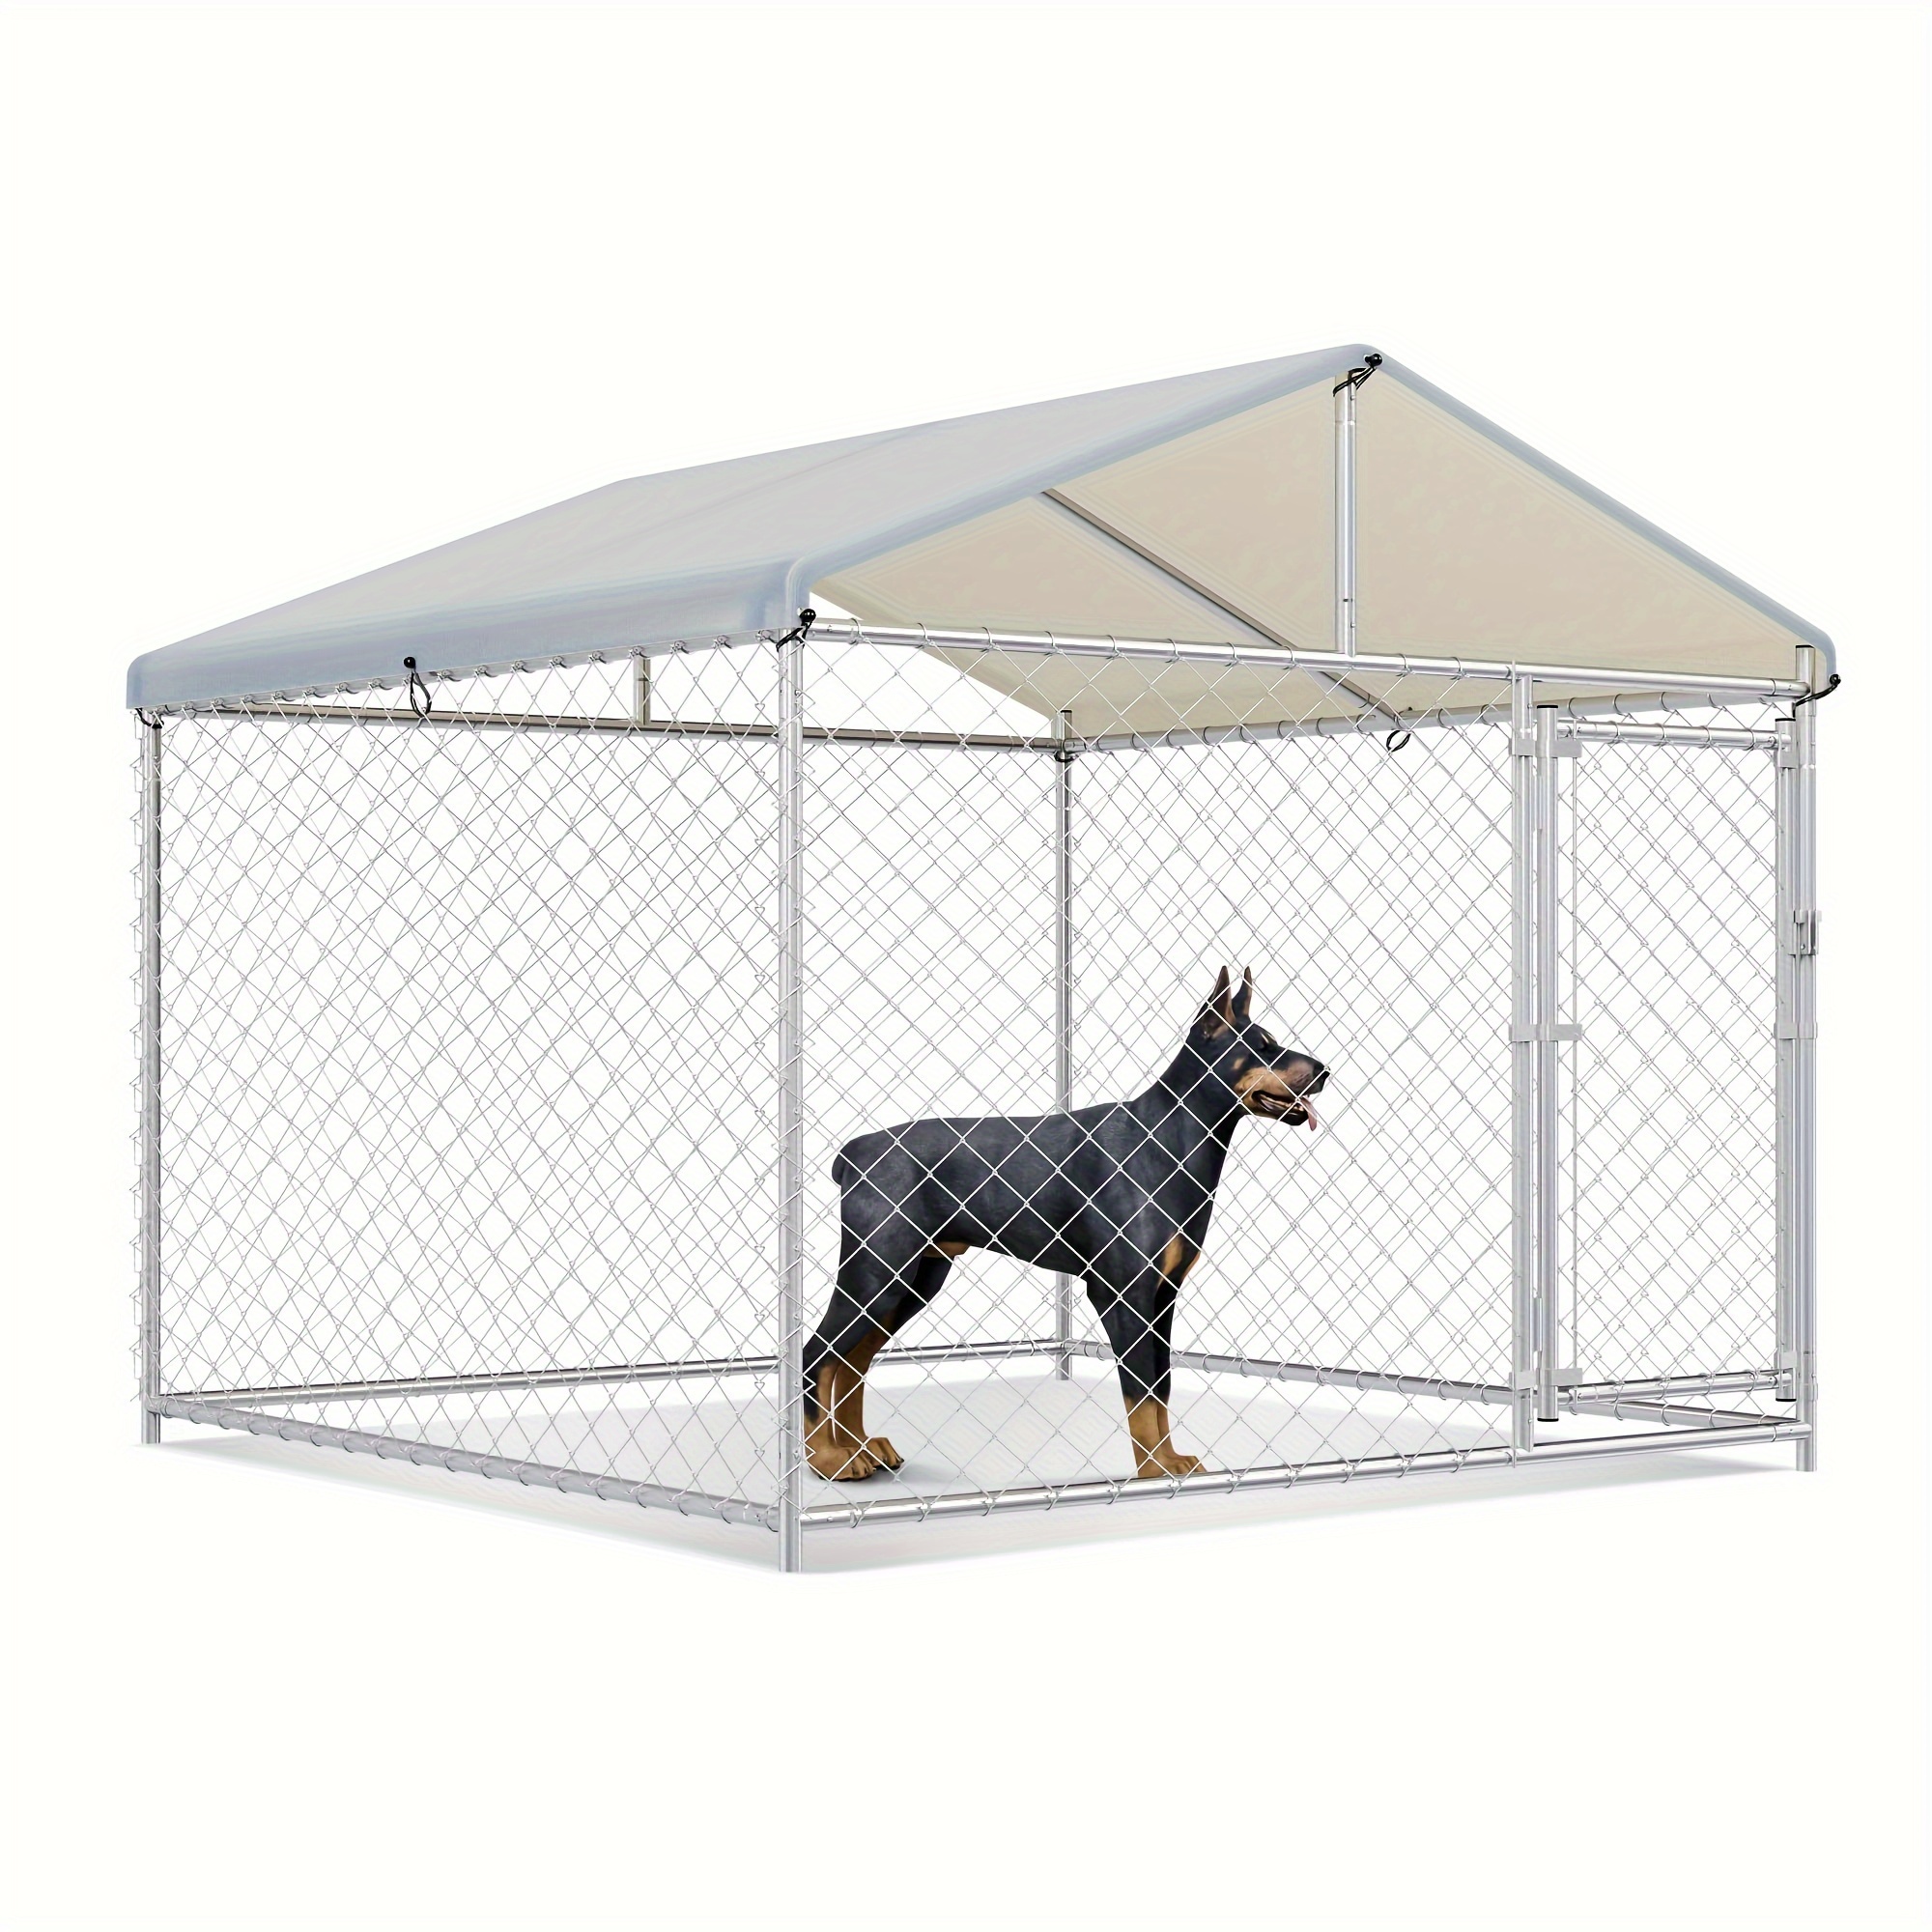 

Large Dog Kennel Outside With Waterproof Cover, Outdoor Dog Kennel With Metal Gate, Heavy Duty Dog Kennel With Secure Lock For Outdoor Backyard W 78" X D 78" X H 67